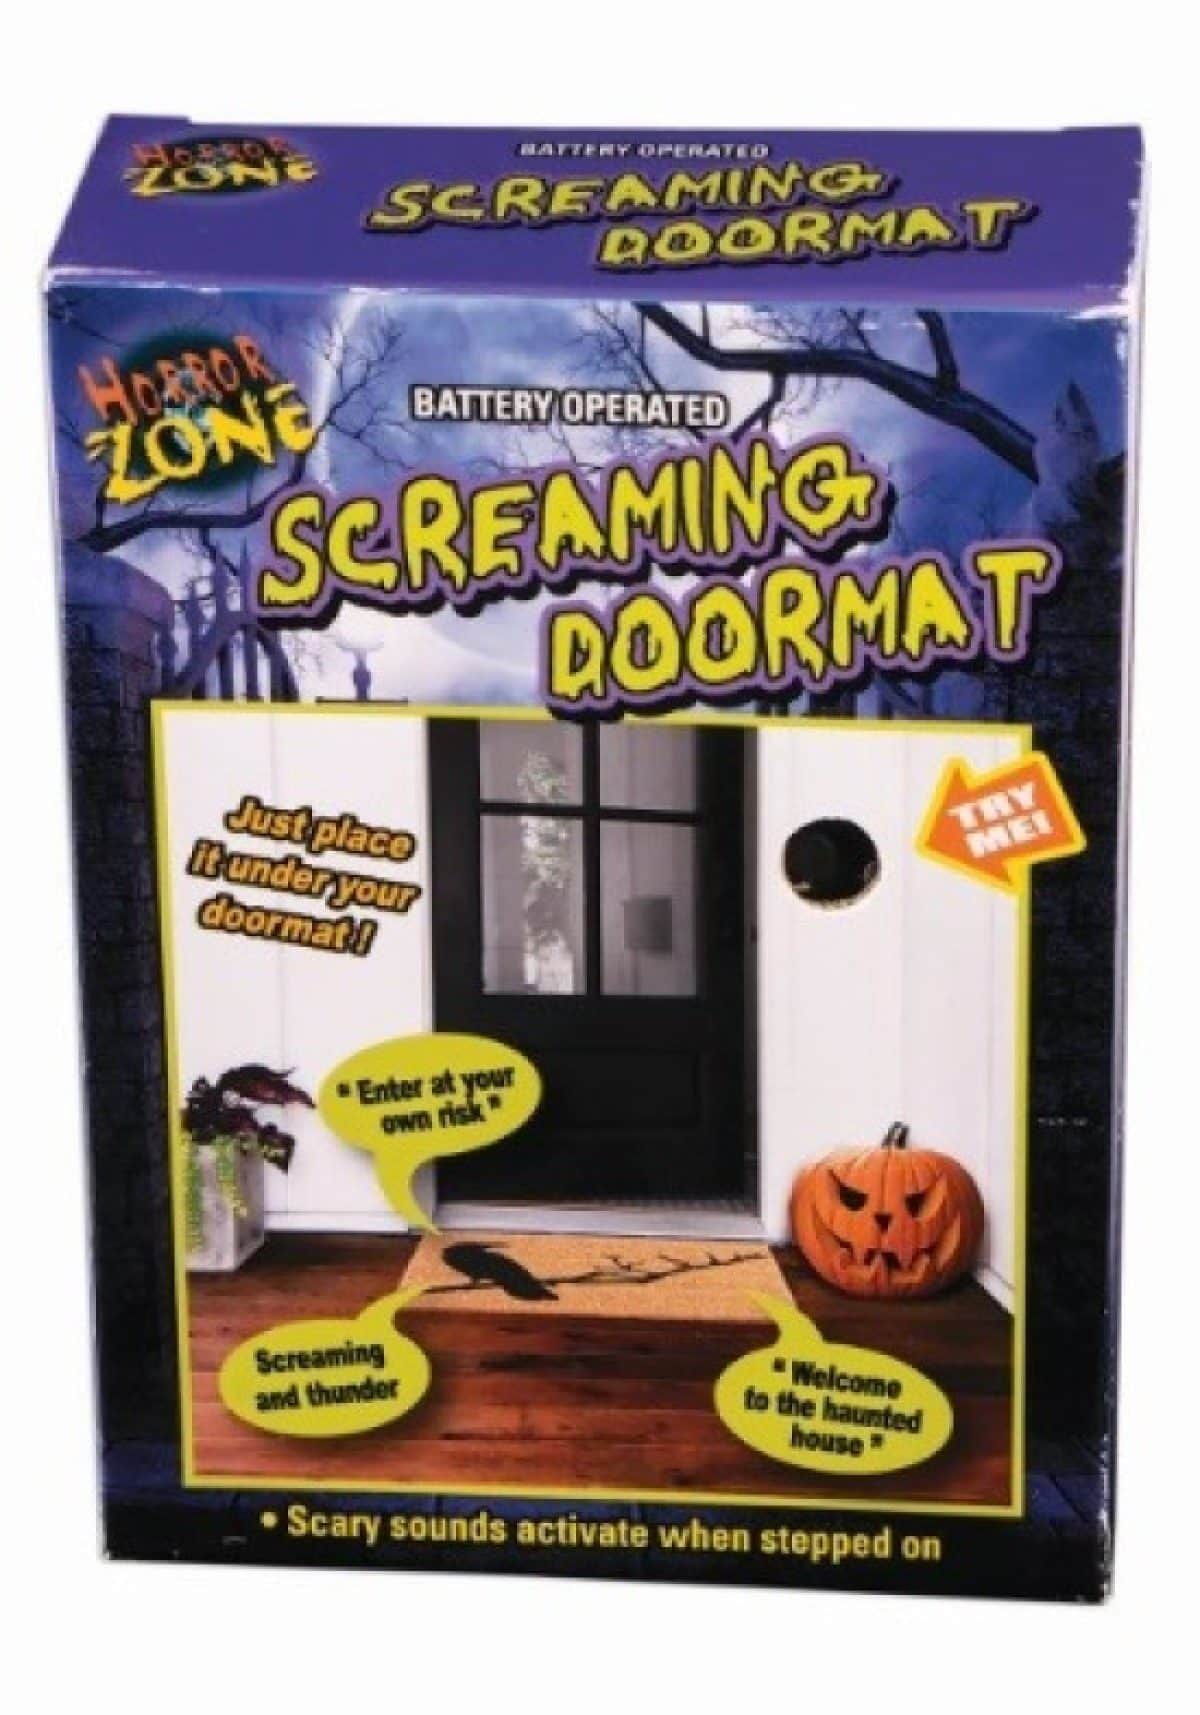 31 Must-Have Halloween Decorations